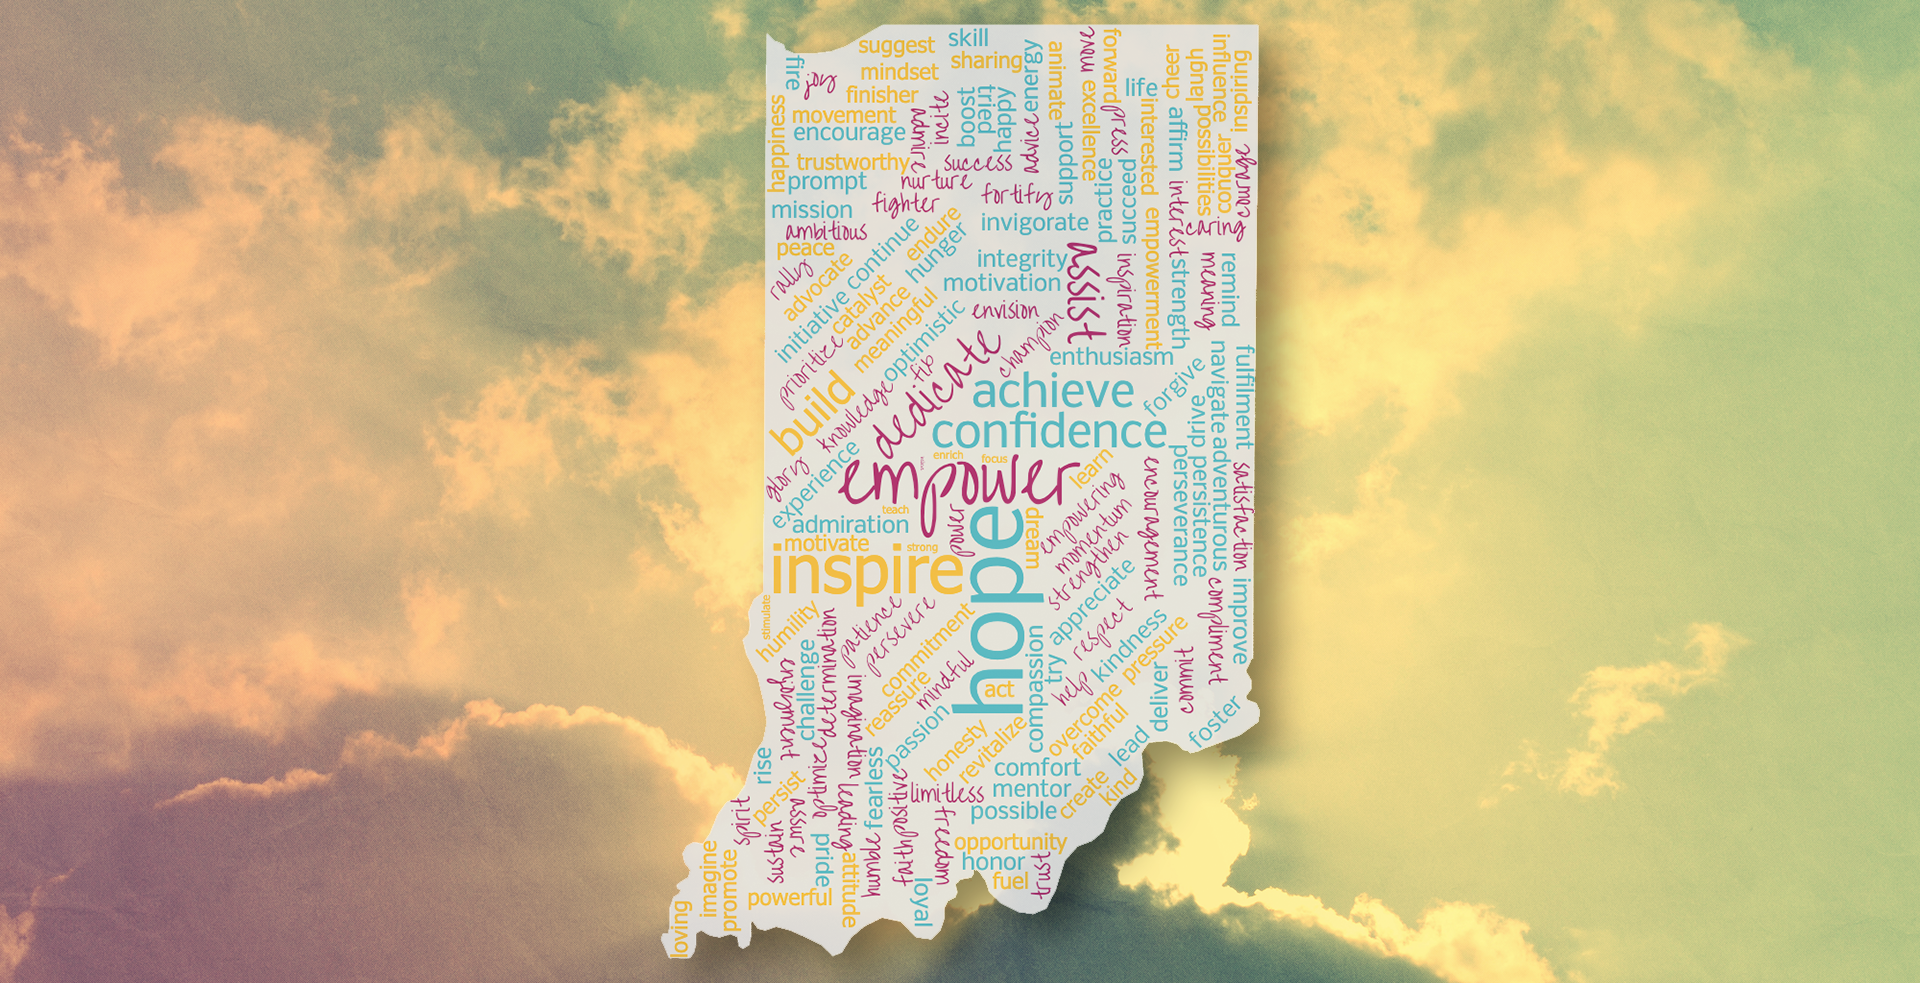 Recovery orgnization - IU Center for Rural Engagement